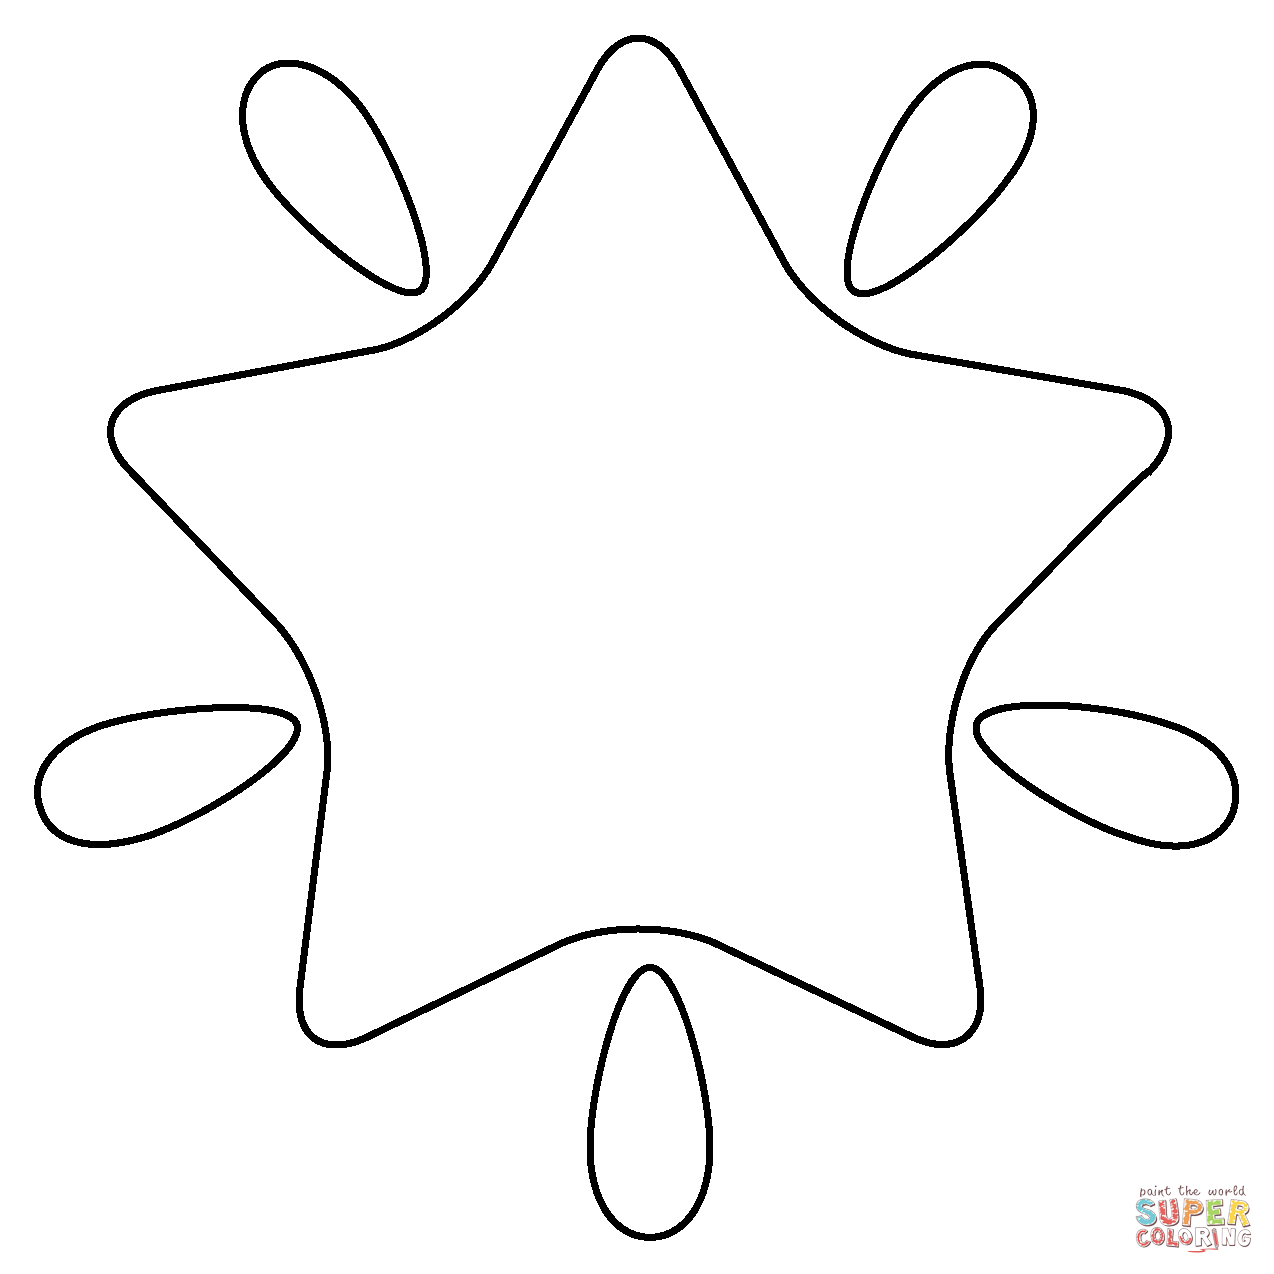 Glowing star emoji coloring page free printable coloring pages